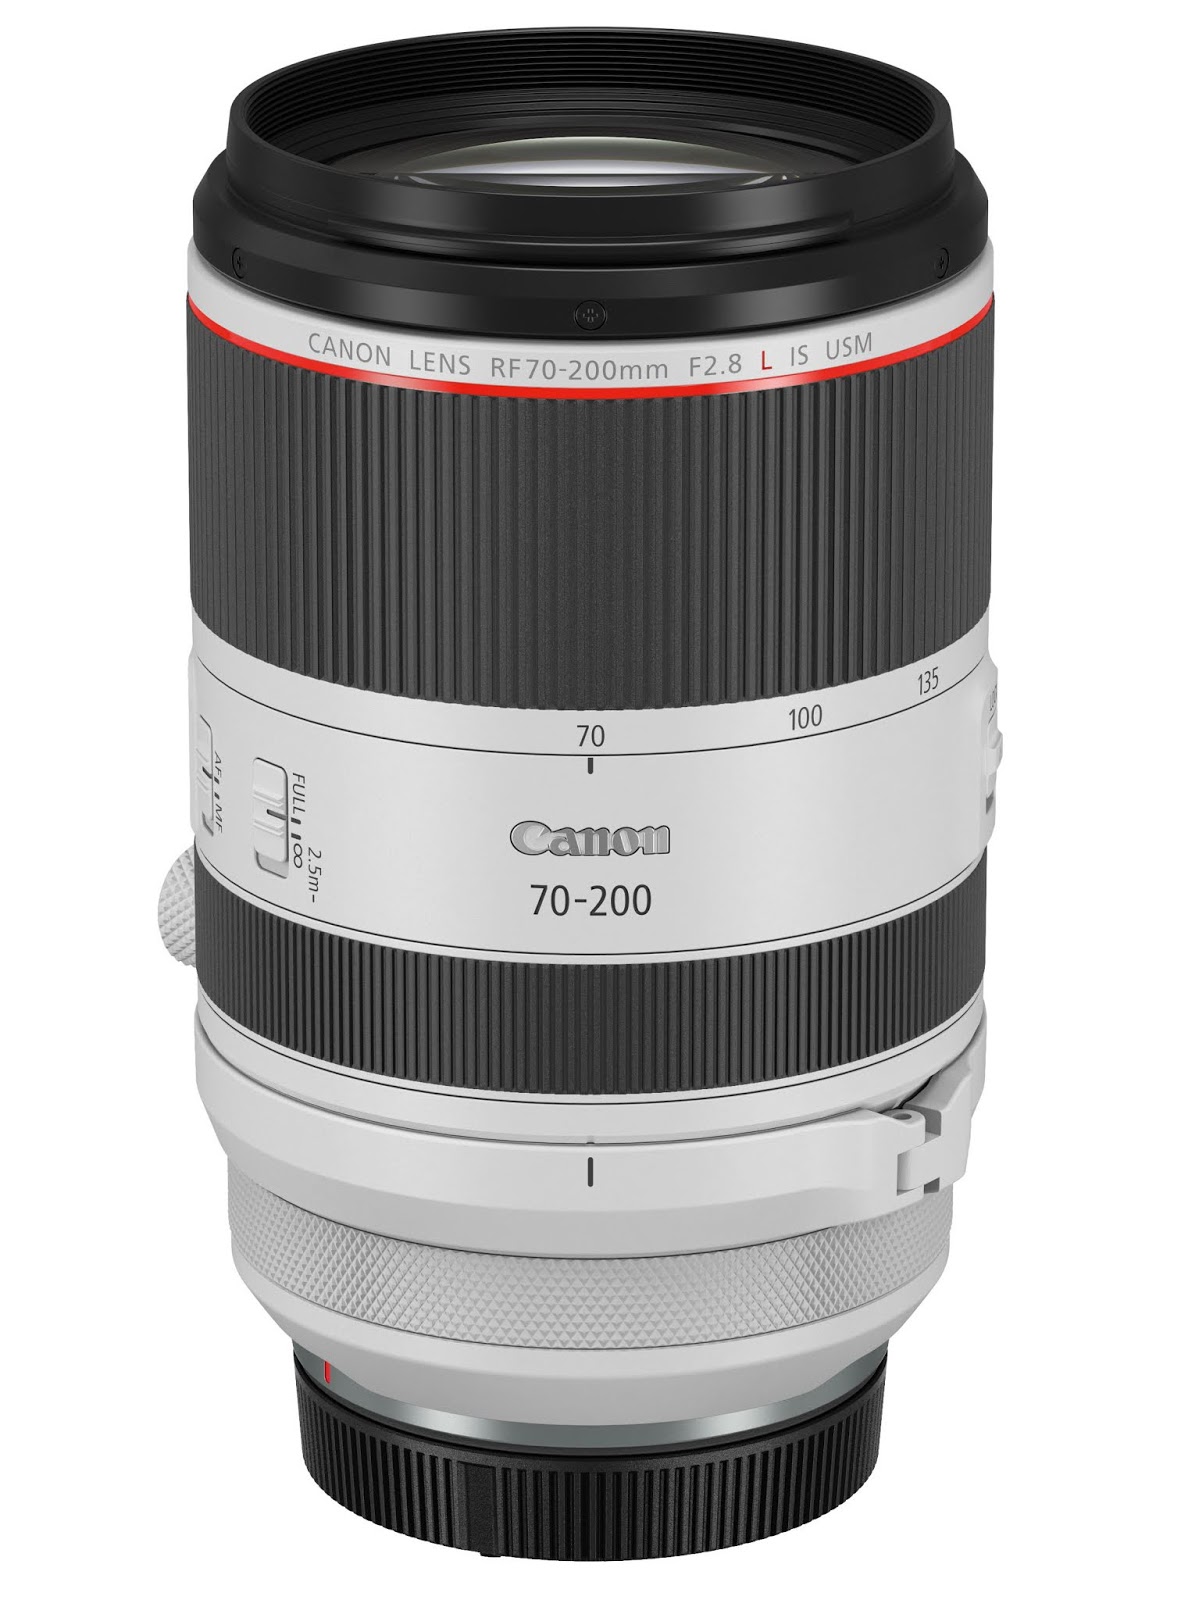 Canon plans for future RF 70200mm f2.8L IS USM lens